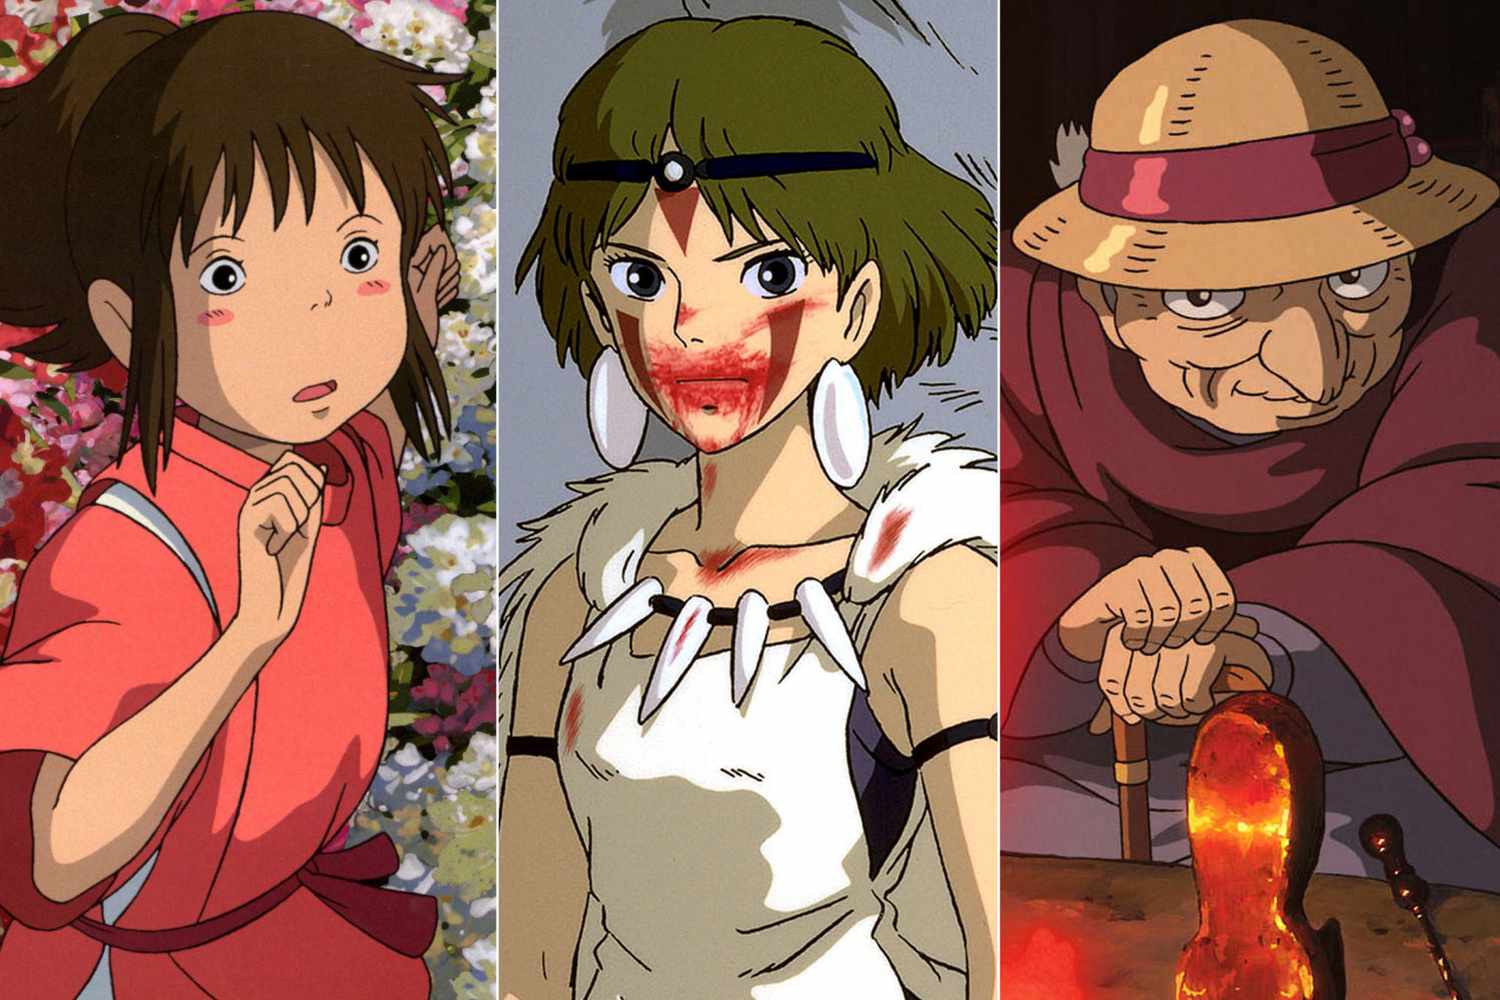 HBO Max will have all Studio Ghibli films including Spirited Away 